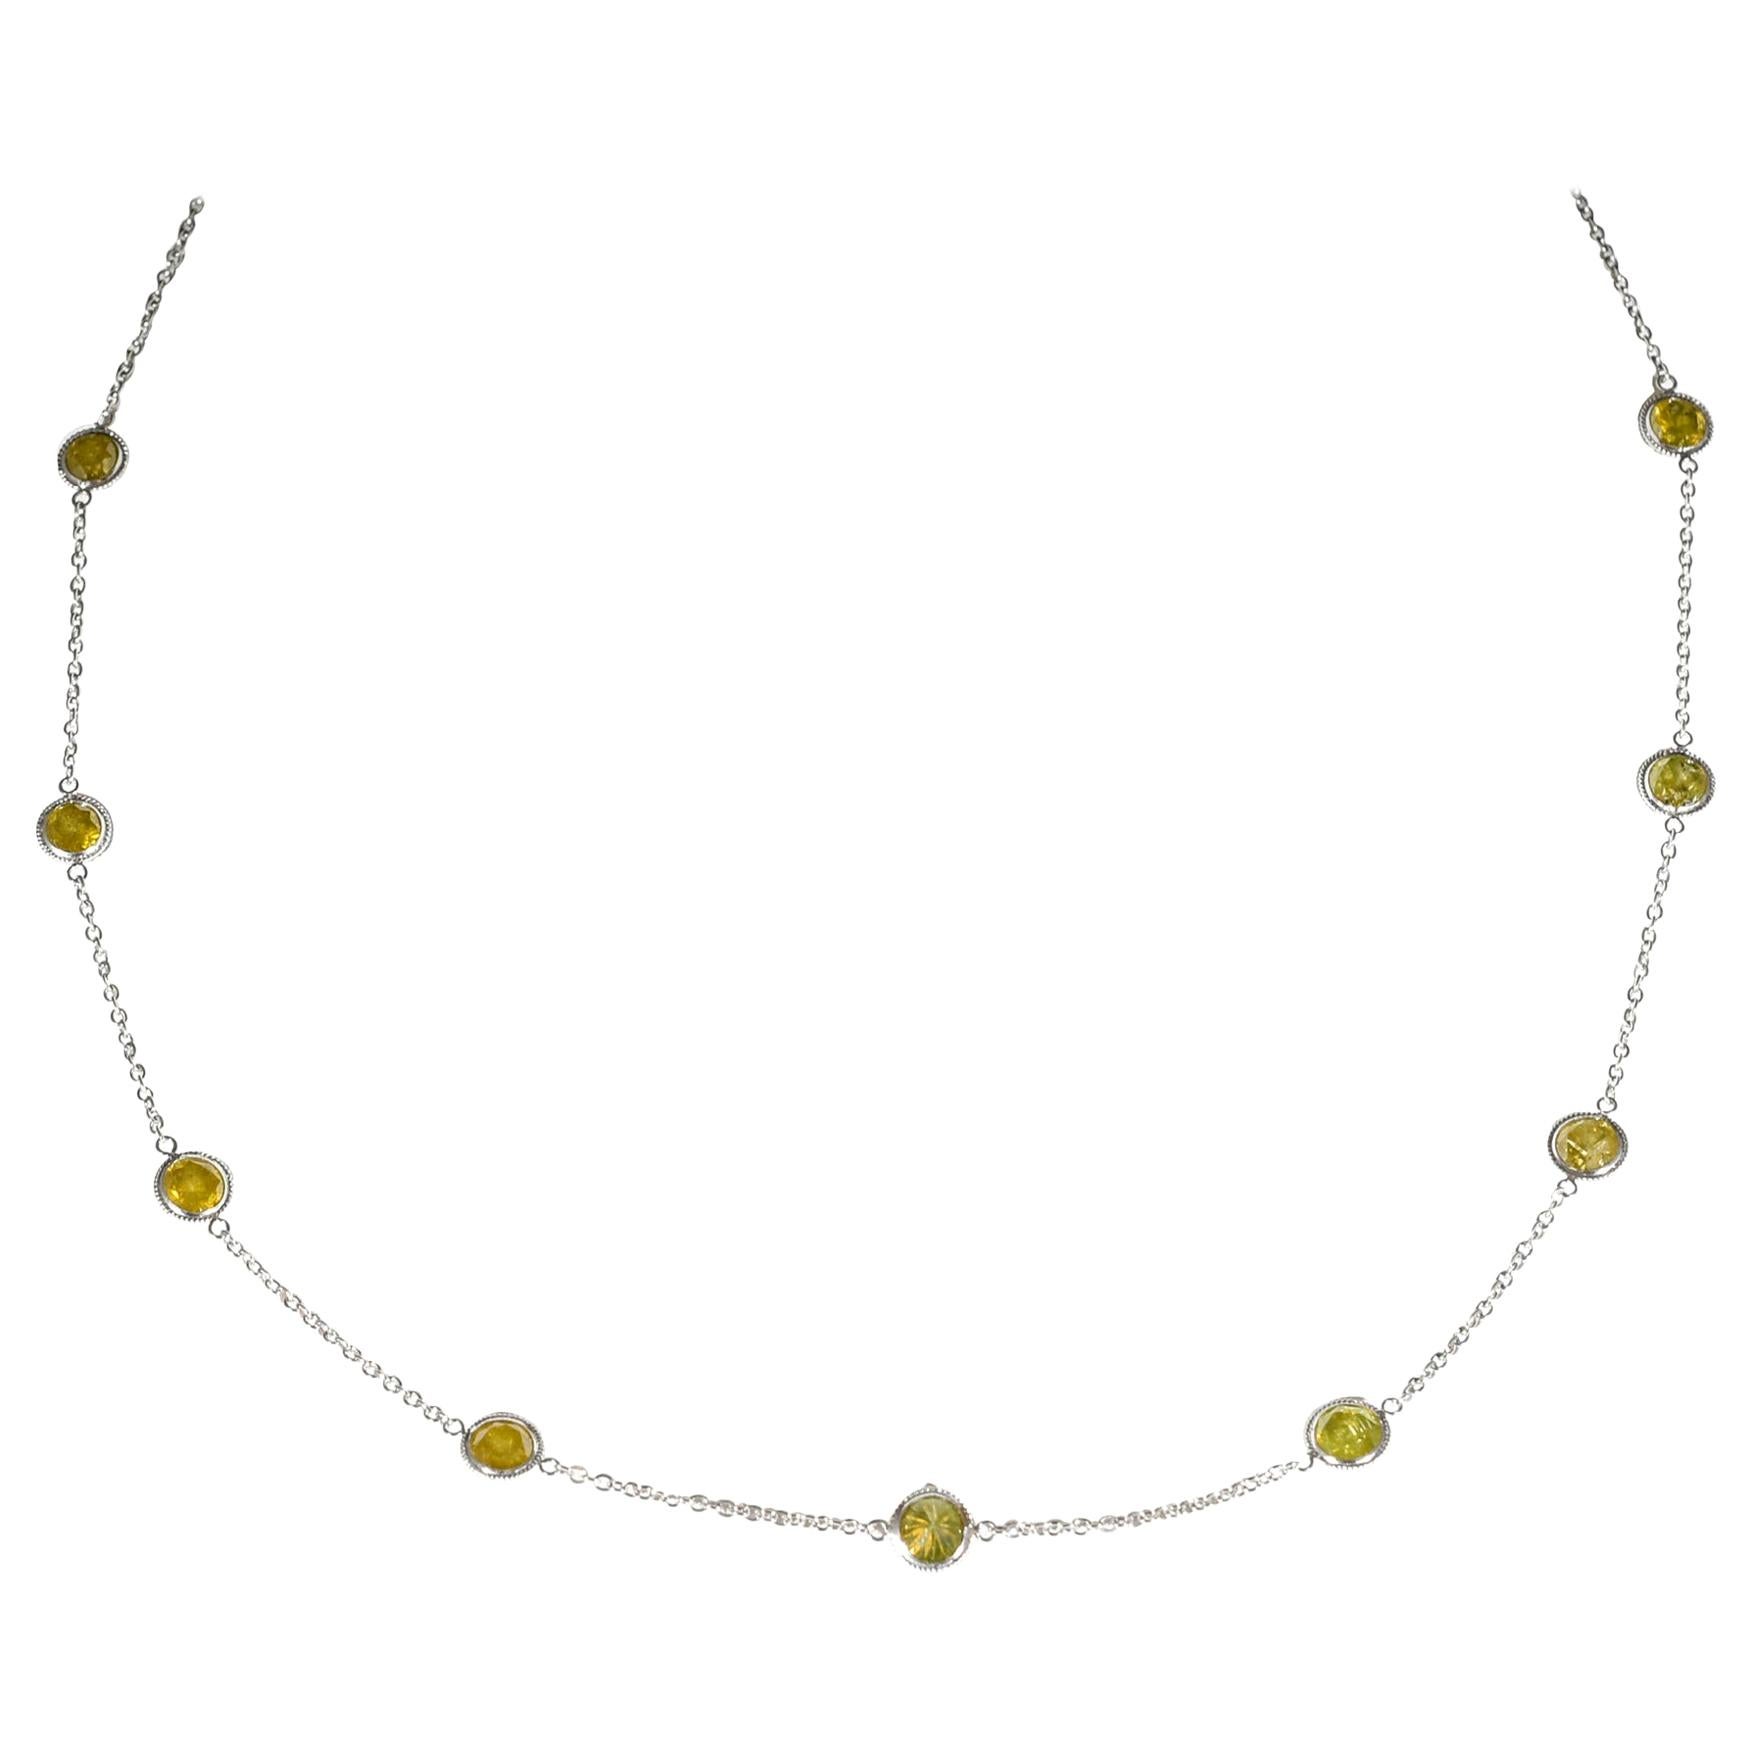 3.65 Carat (Treated) Yellow Diamond by the Yard Choker Necklace For Sale